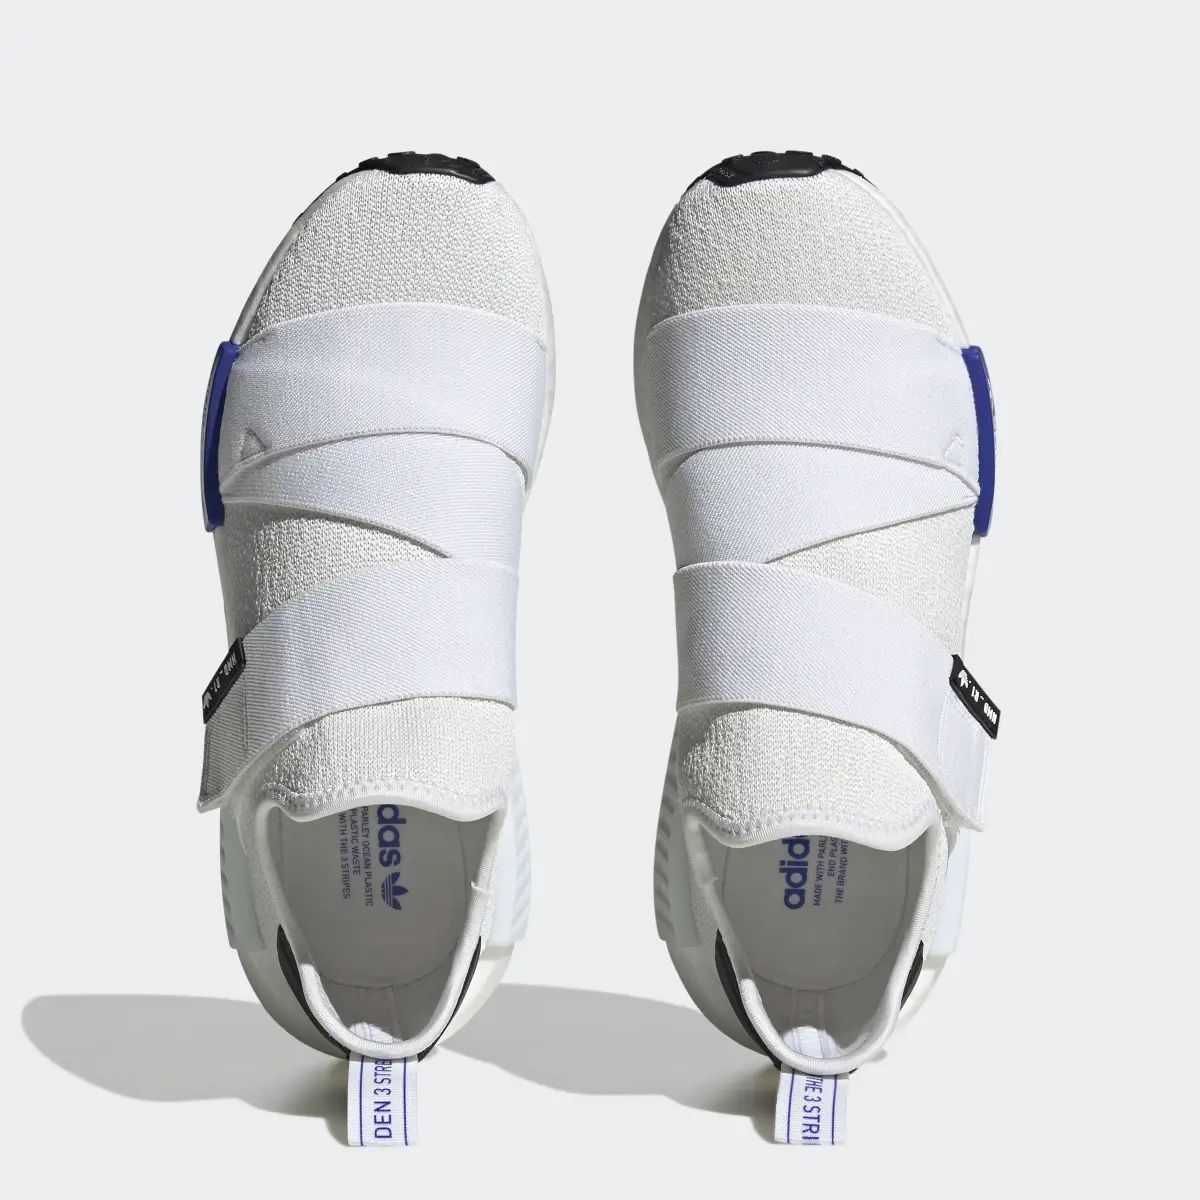 Adidas NMD_R1 Strap Shoes. 3